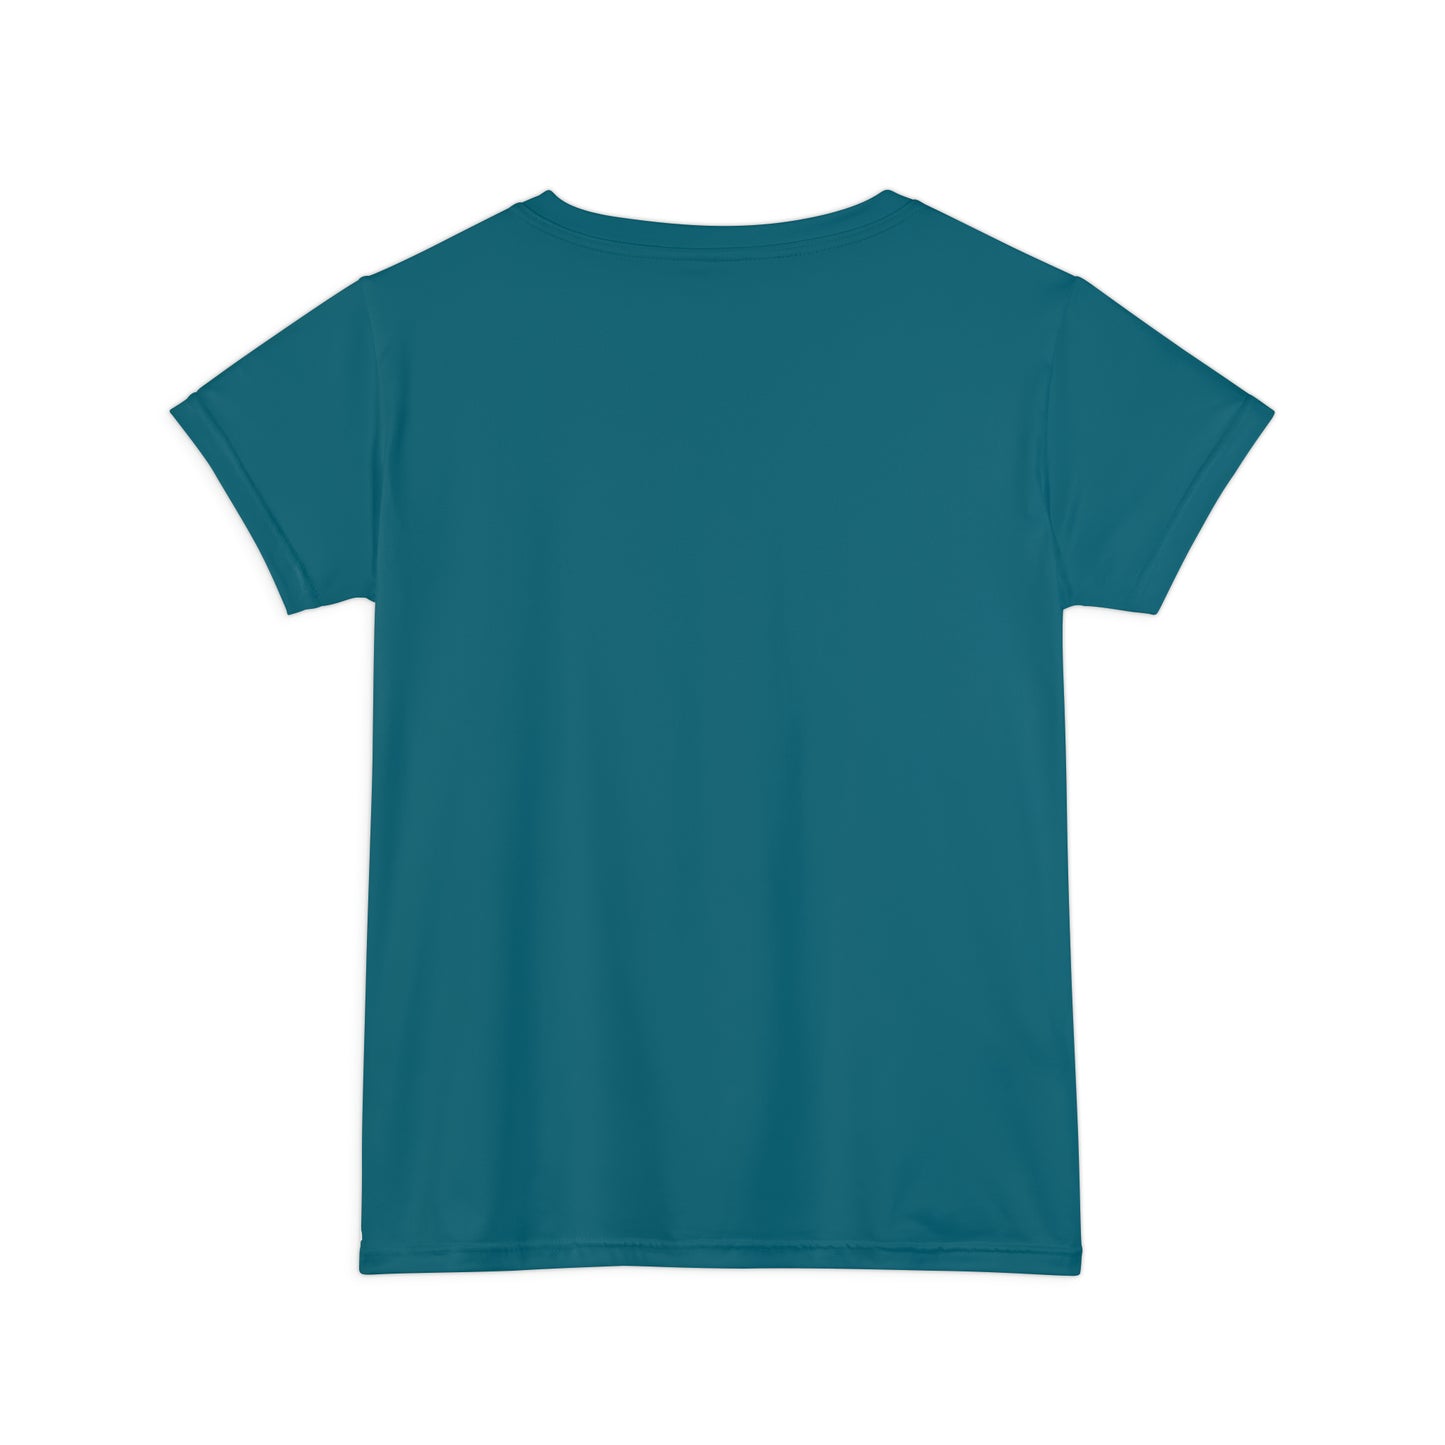 Victory Monday Teal Women's Tee